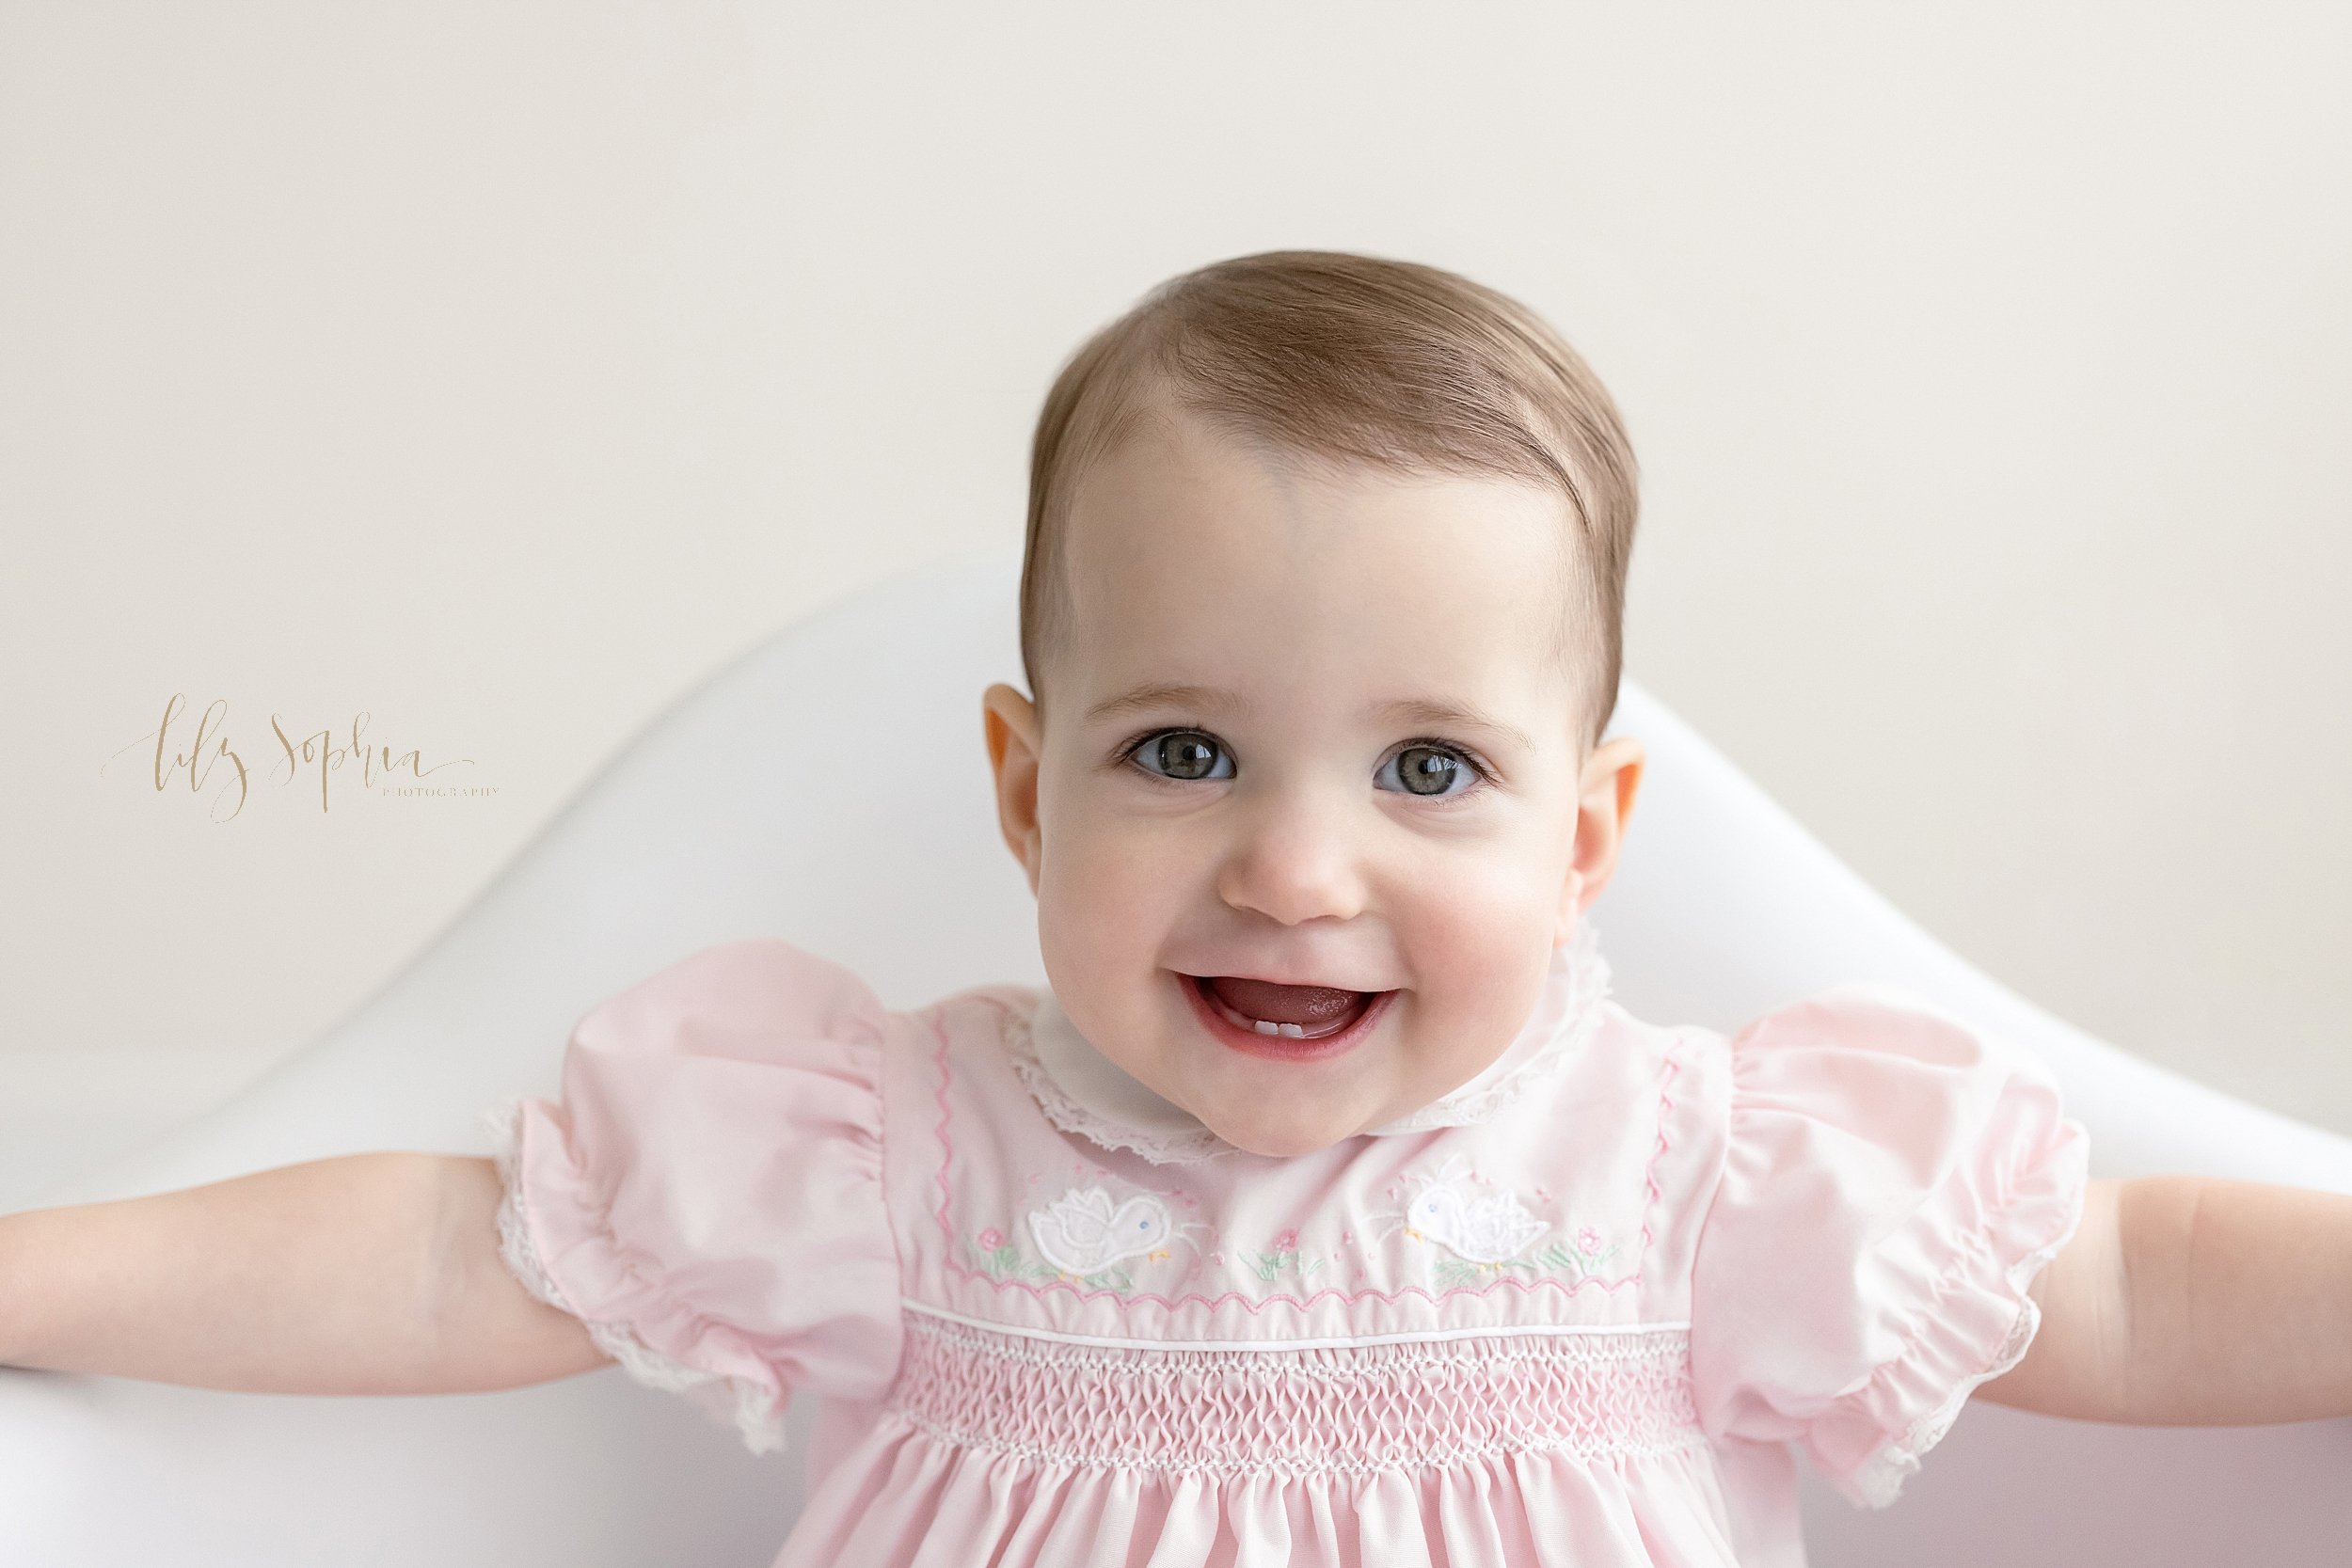  First Birthday close-up portrait of a smiling baby girl  wearing a smocked peter pan collared dress as she sits holding the sides of a white molded chair showing her baby teeth taken in a studio near Poncey Highlands in Atlanta that uses natural lig